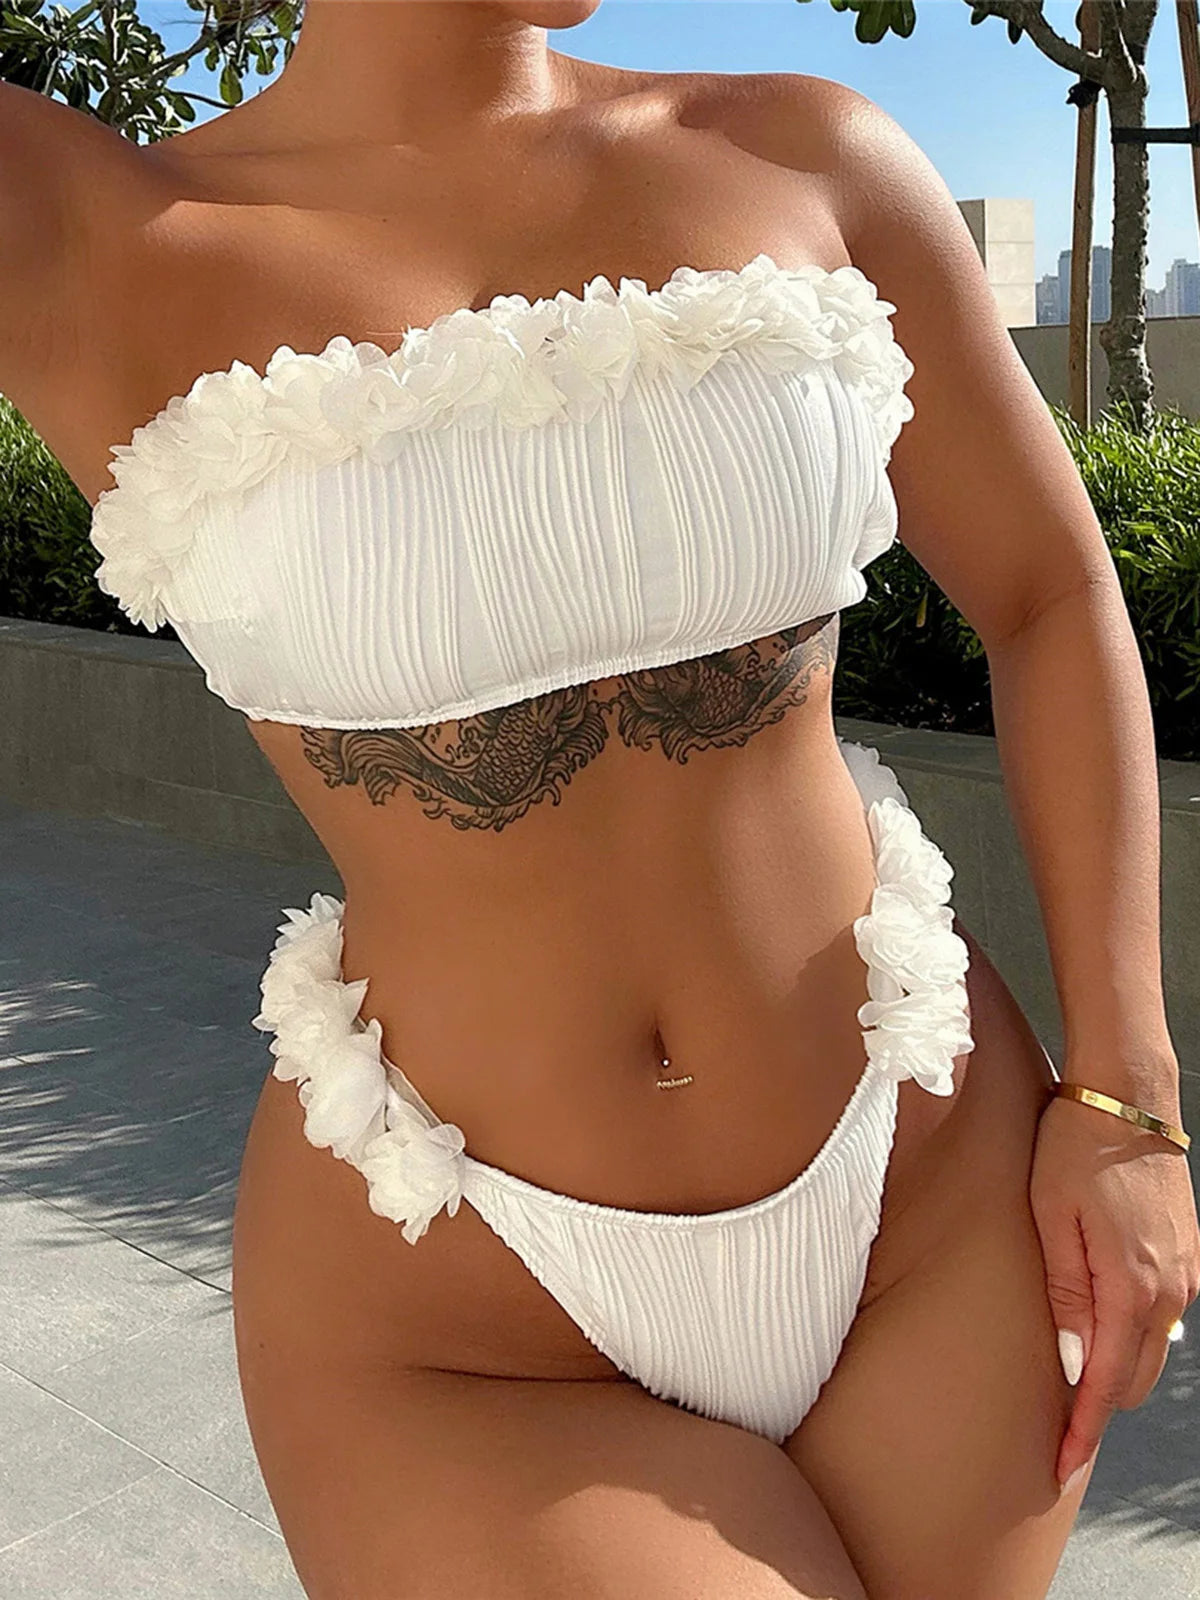 Bandeau Wrinkled Ruffled Bikini Set, Low Waist Two-Piece Swimwear, Made of Nylon and Spandex, Solid Pattern, Wire-Free Comfort, True to Size, Women's Bikini Set, Comes with Padding, Available in Sizes Small, Medium, and Large, In White Color, Free Shipping.